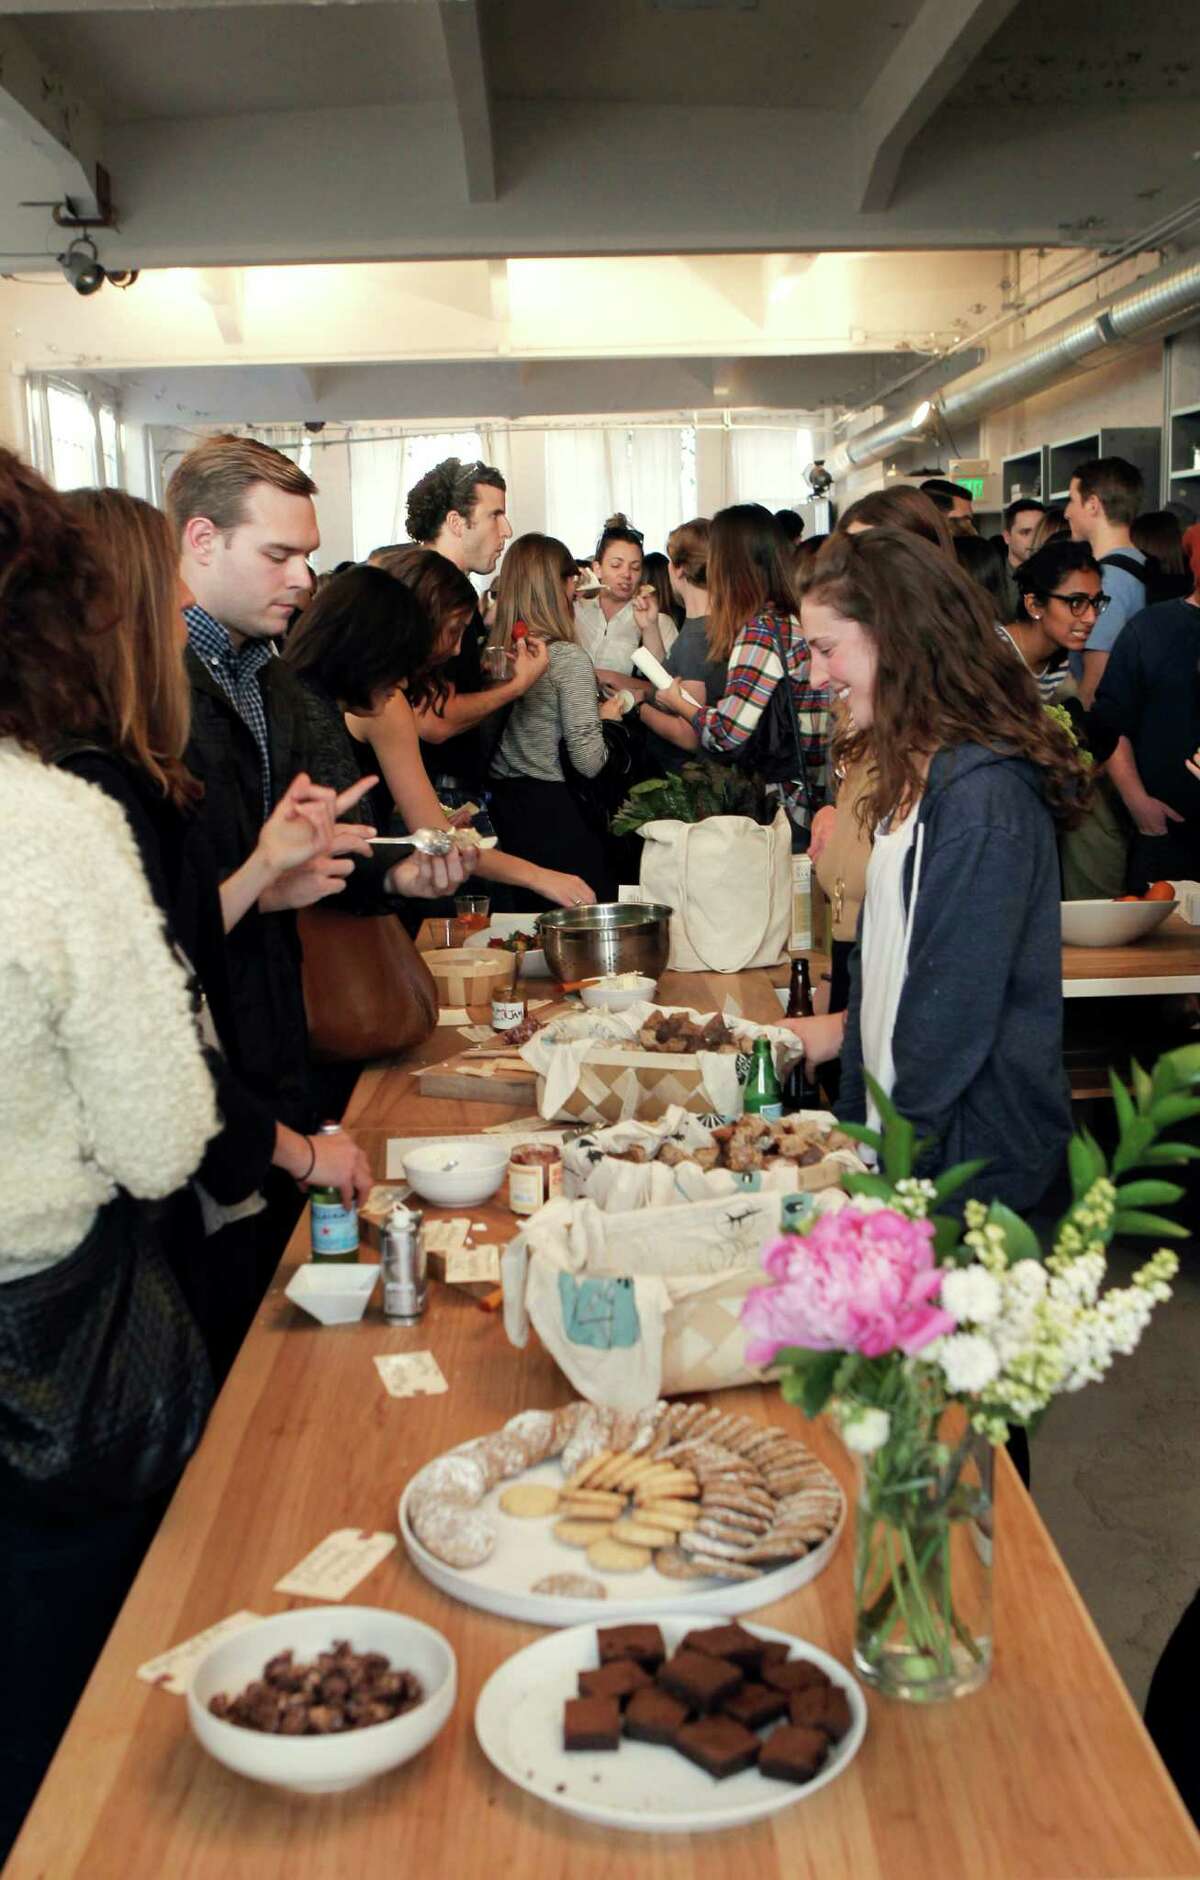 Customers socialize and sample Good Eggs snacks at the monthly open studio event at Everlane's office.